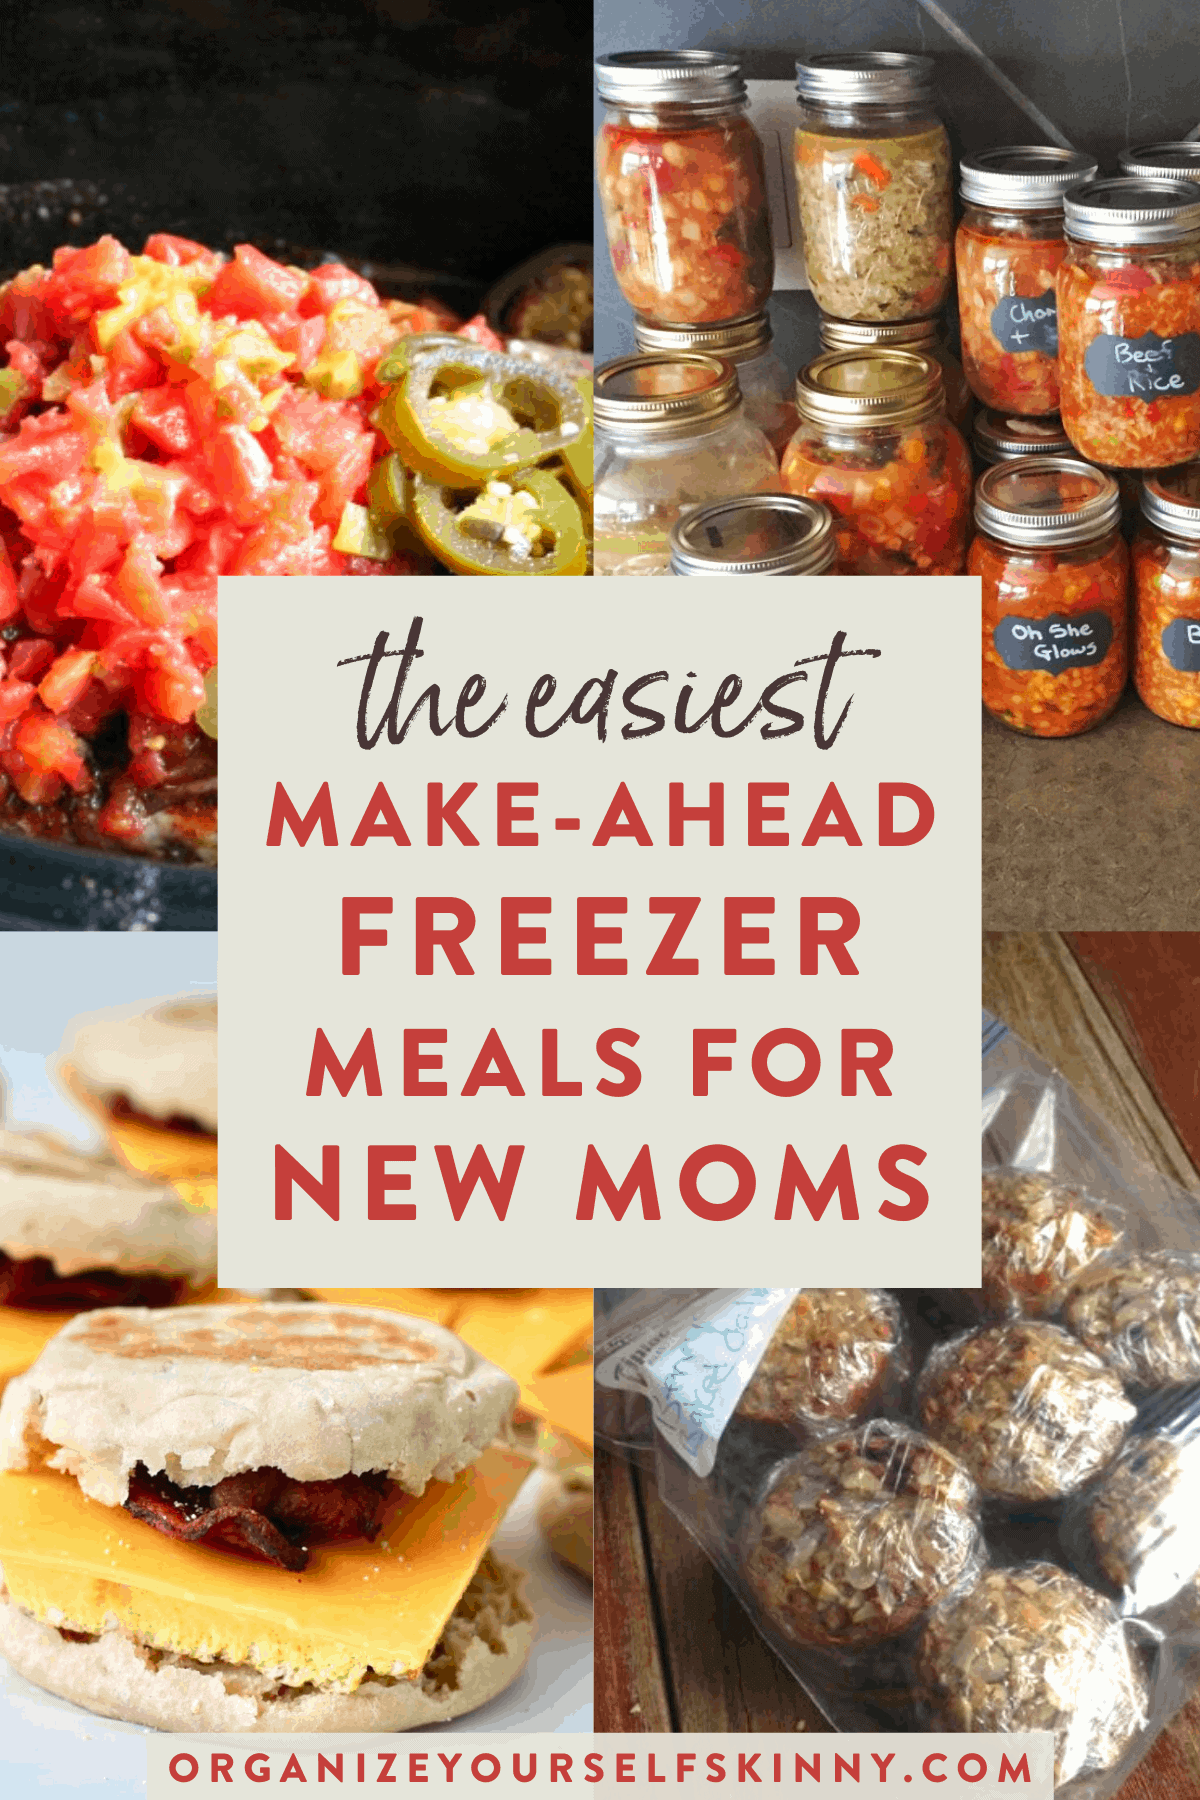 Easy Freezer Meals For New Moms - Organize Yourself Skinny